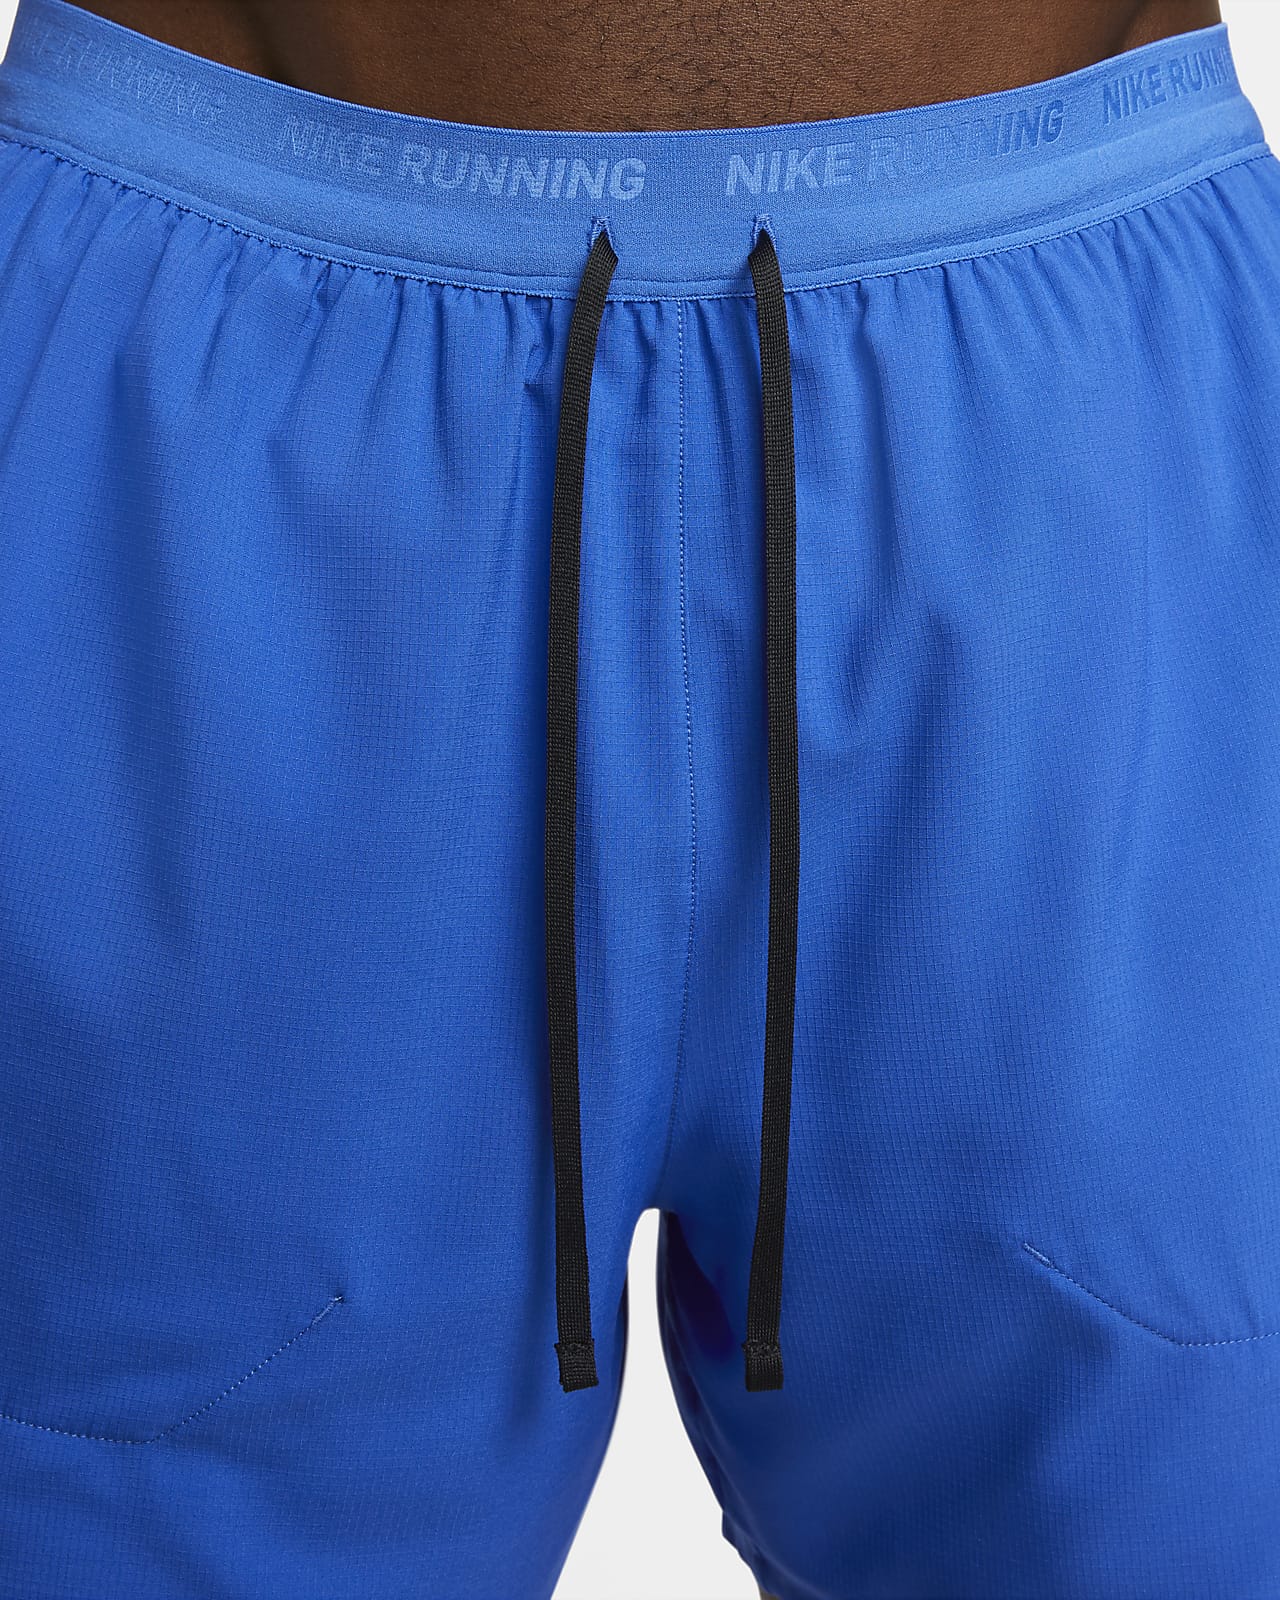 Nike Men's Dri-FIT 5" Brief-Lined Shorts.